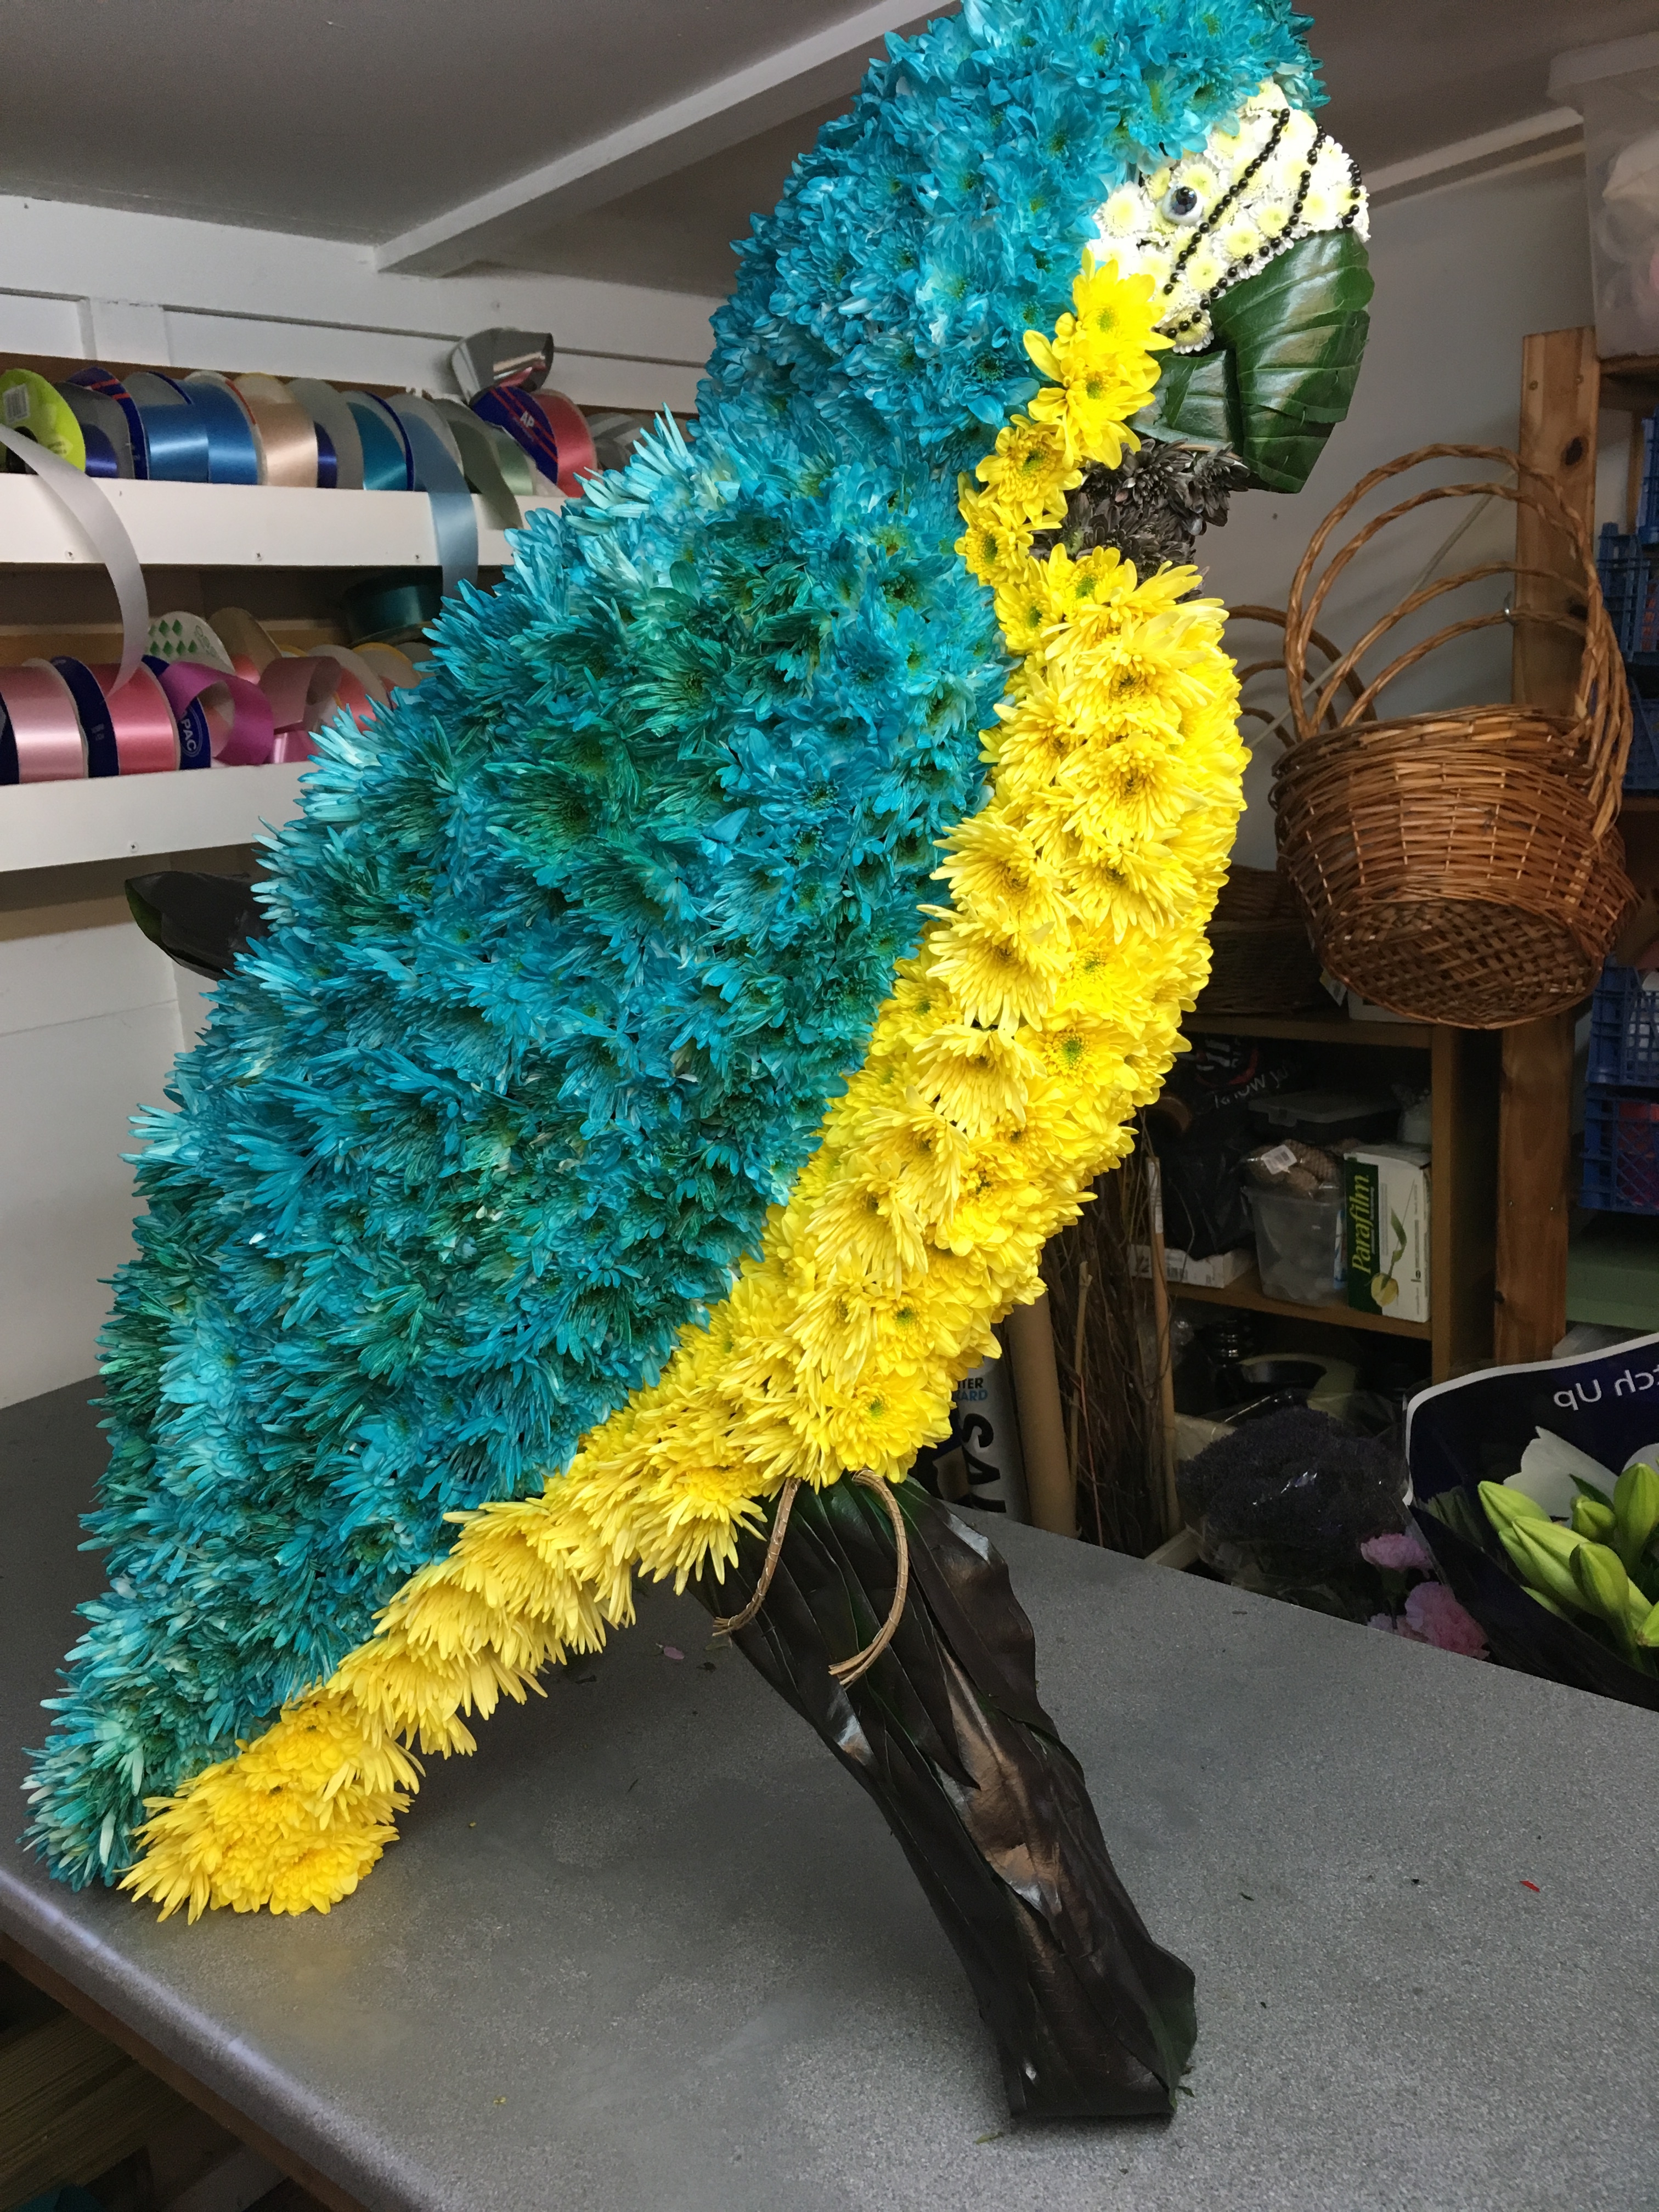 Macaw parrot made from flowers